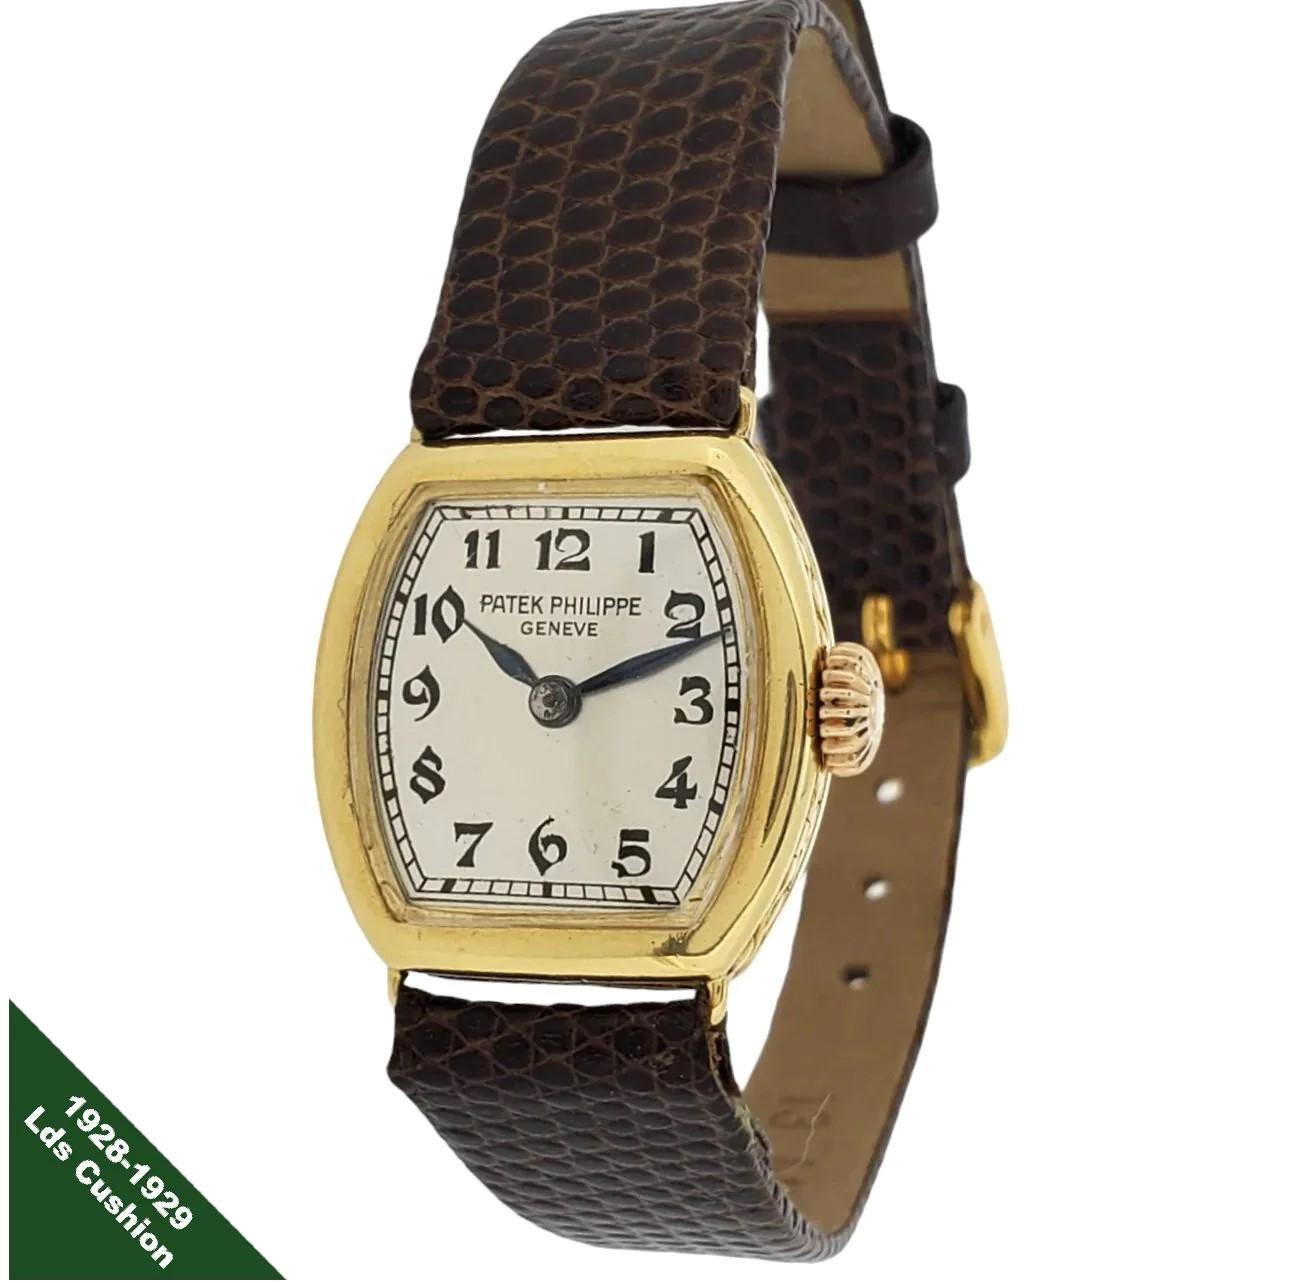 Patek Philippe 1928-1929 Early Cushion Ladies Watch;  Made in 18K yellow gold measuring 21 x 21mm with a silvered dial, black Breguet numerals, Blue steel hands.  The watch is fitted with an 8-85 caliber 18-jewel manual wind movement 815235 /